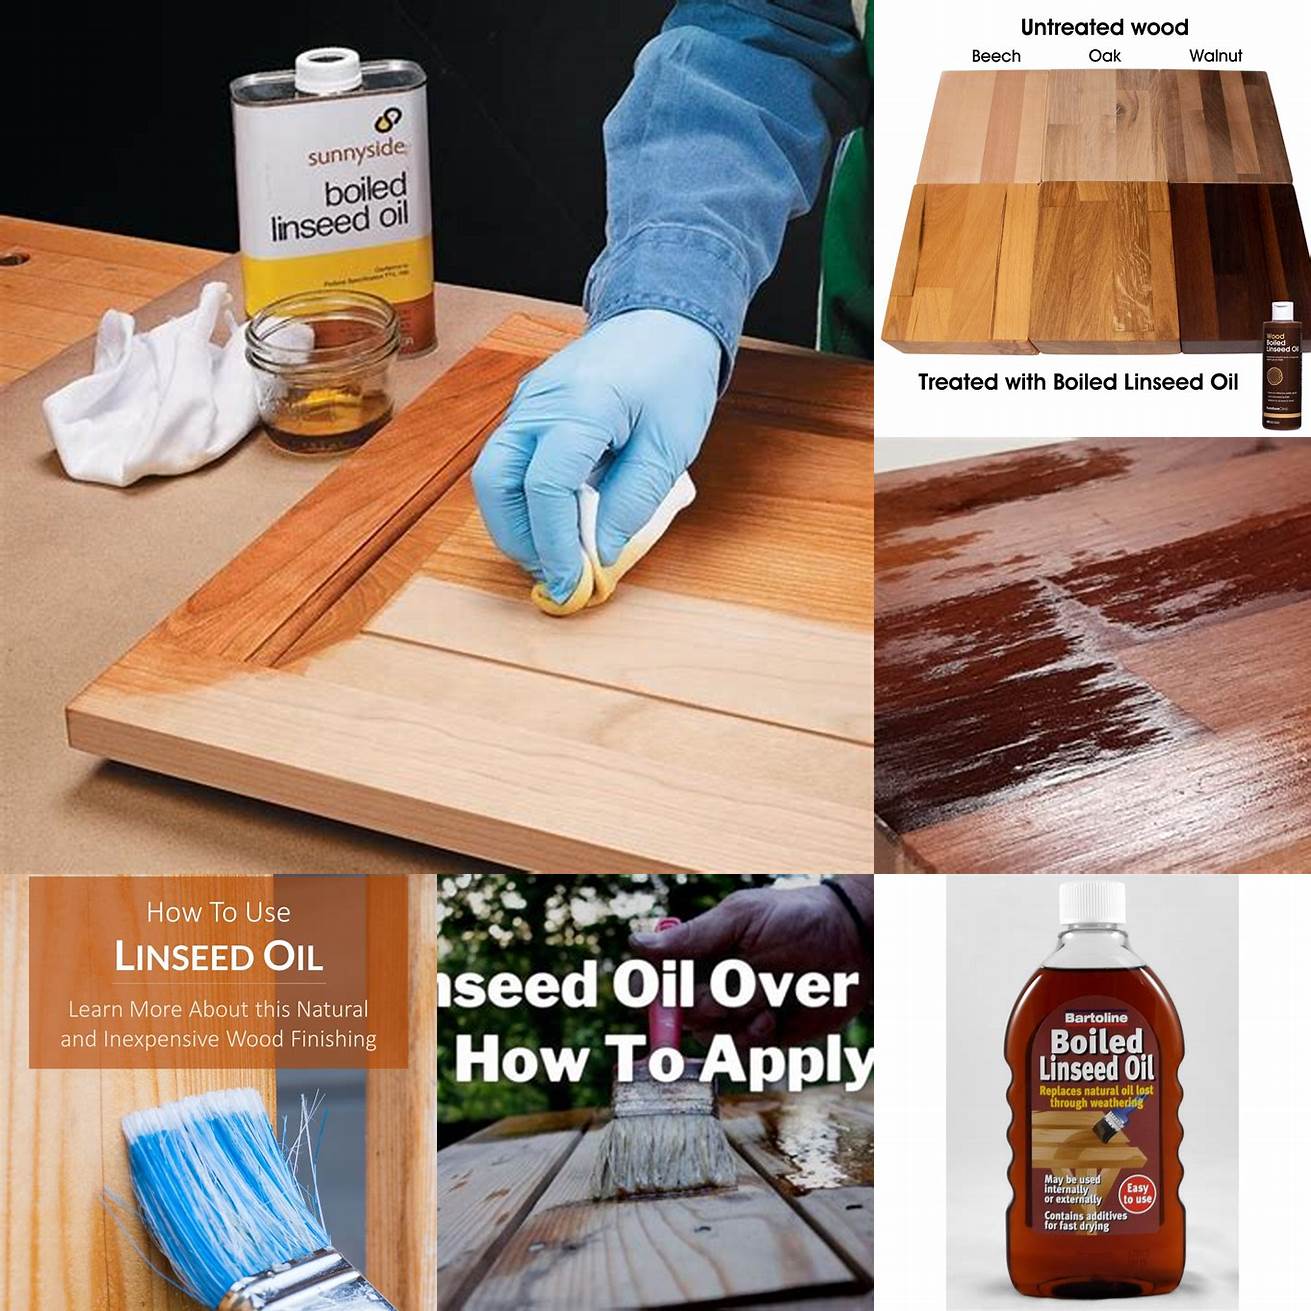 Regularly applying boiled linseed oil